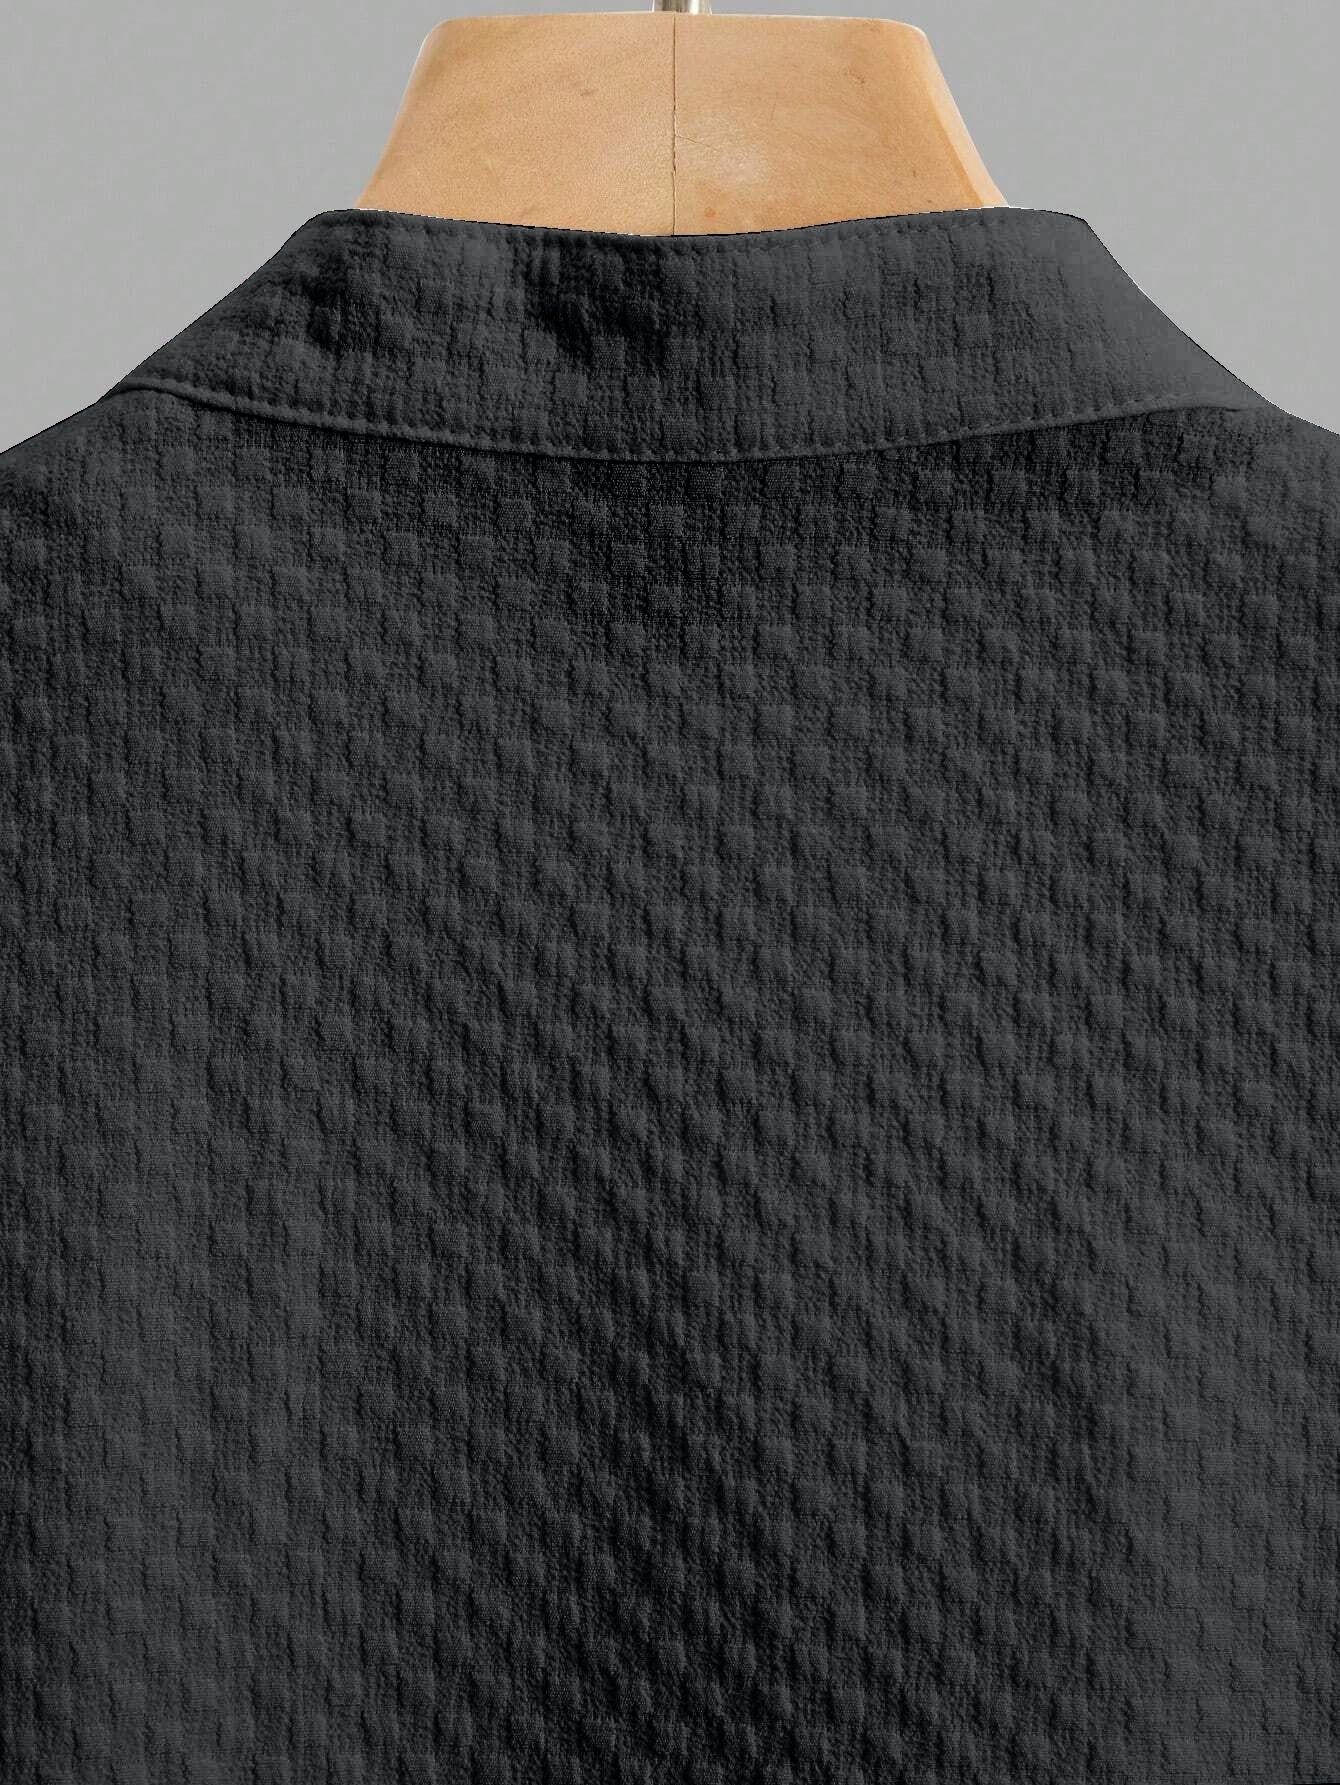 Chicken Black Plain Shirt Cotton Material for Mens Available